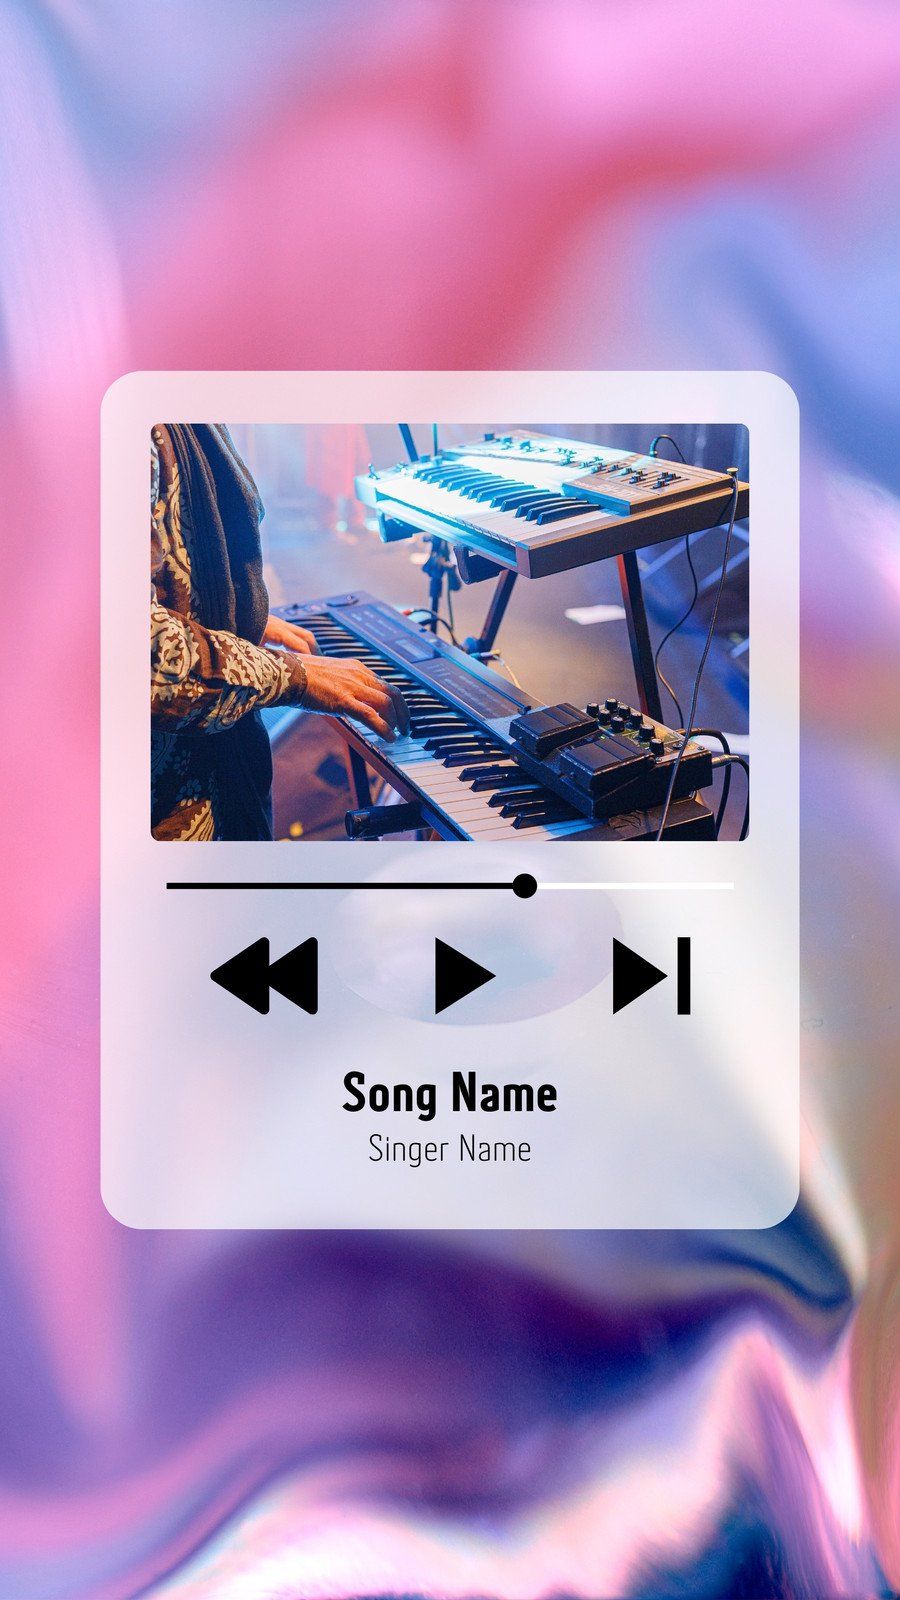 A holographic music player with a song name and singer name on it - Spotify